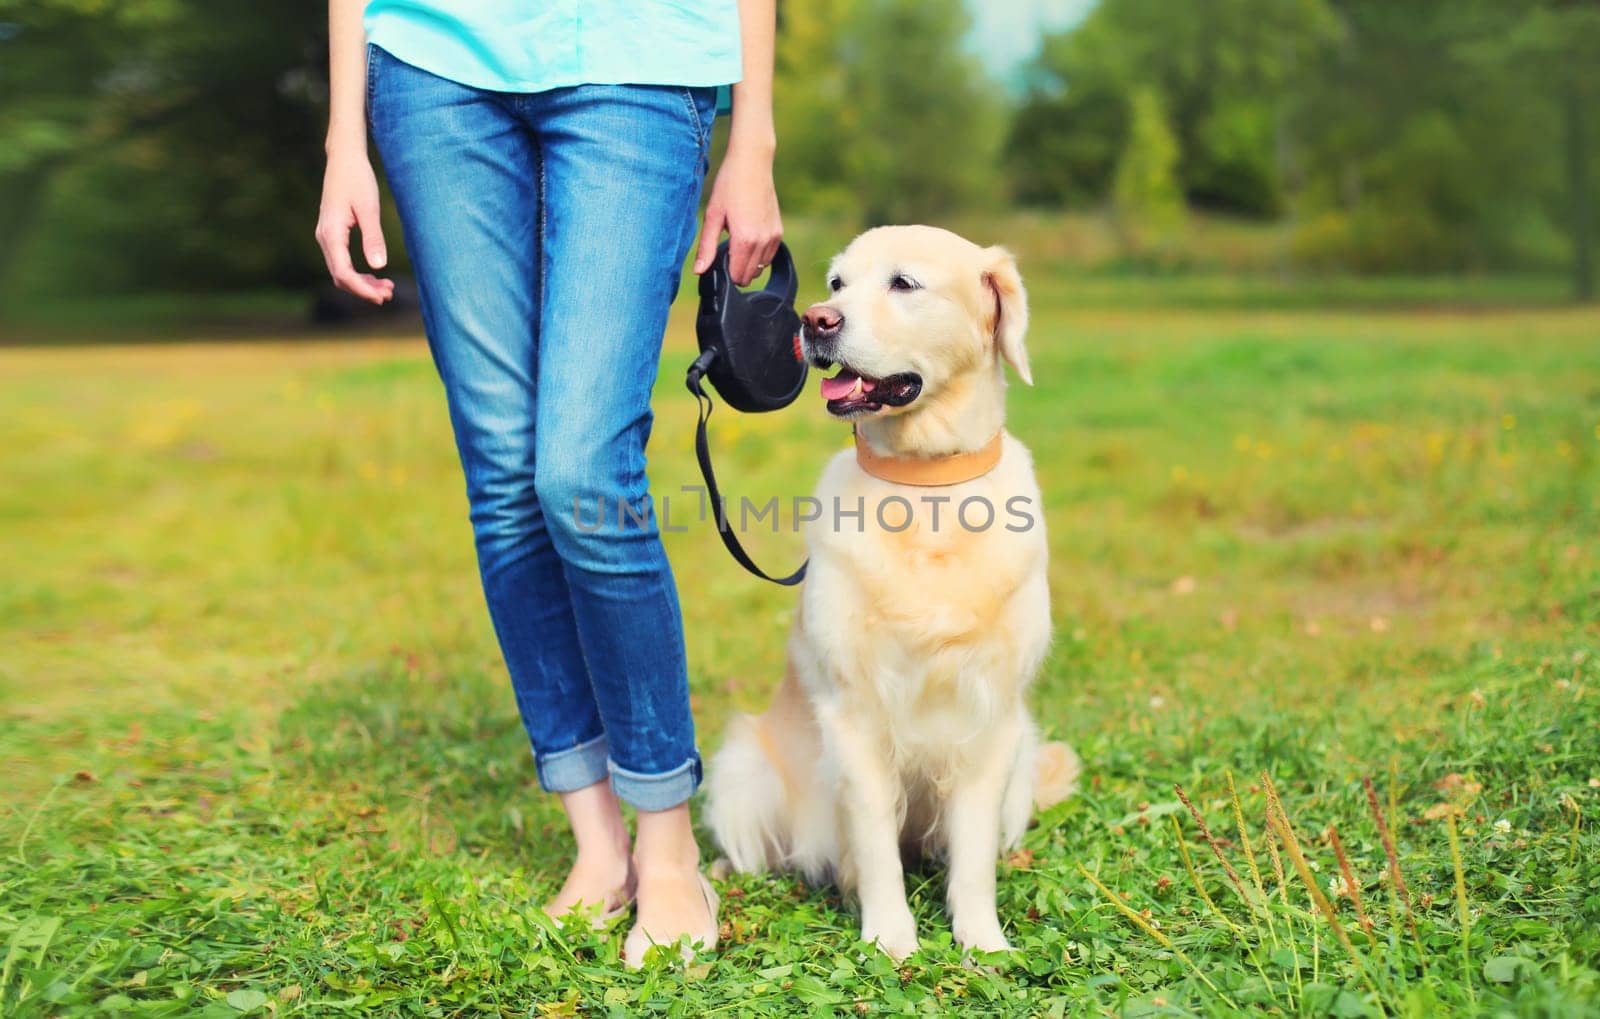 Owner woman walking with her Golden Retriever dog on leash in summer park by Rohappy